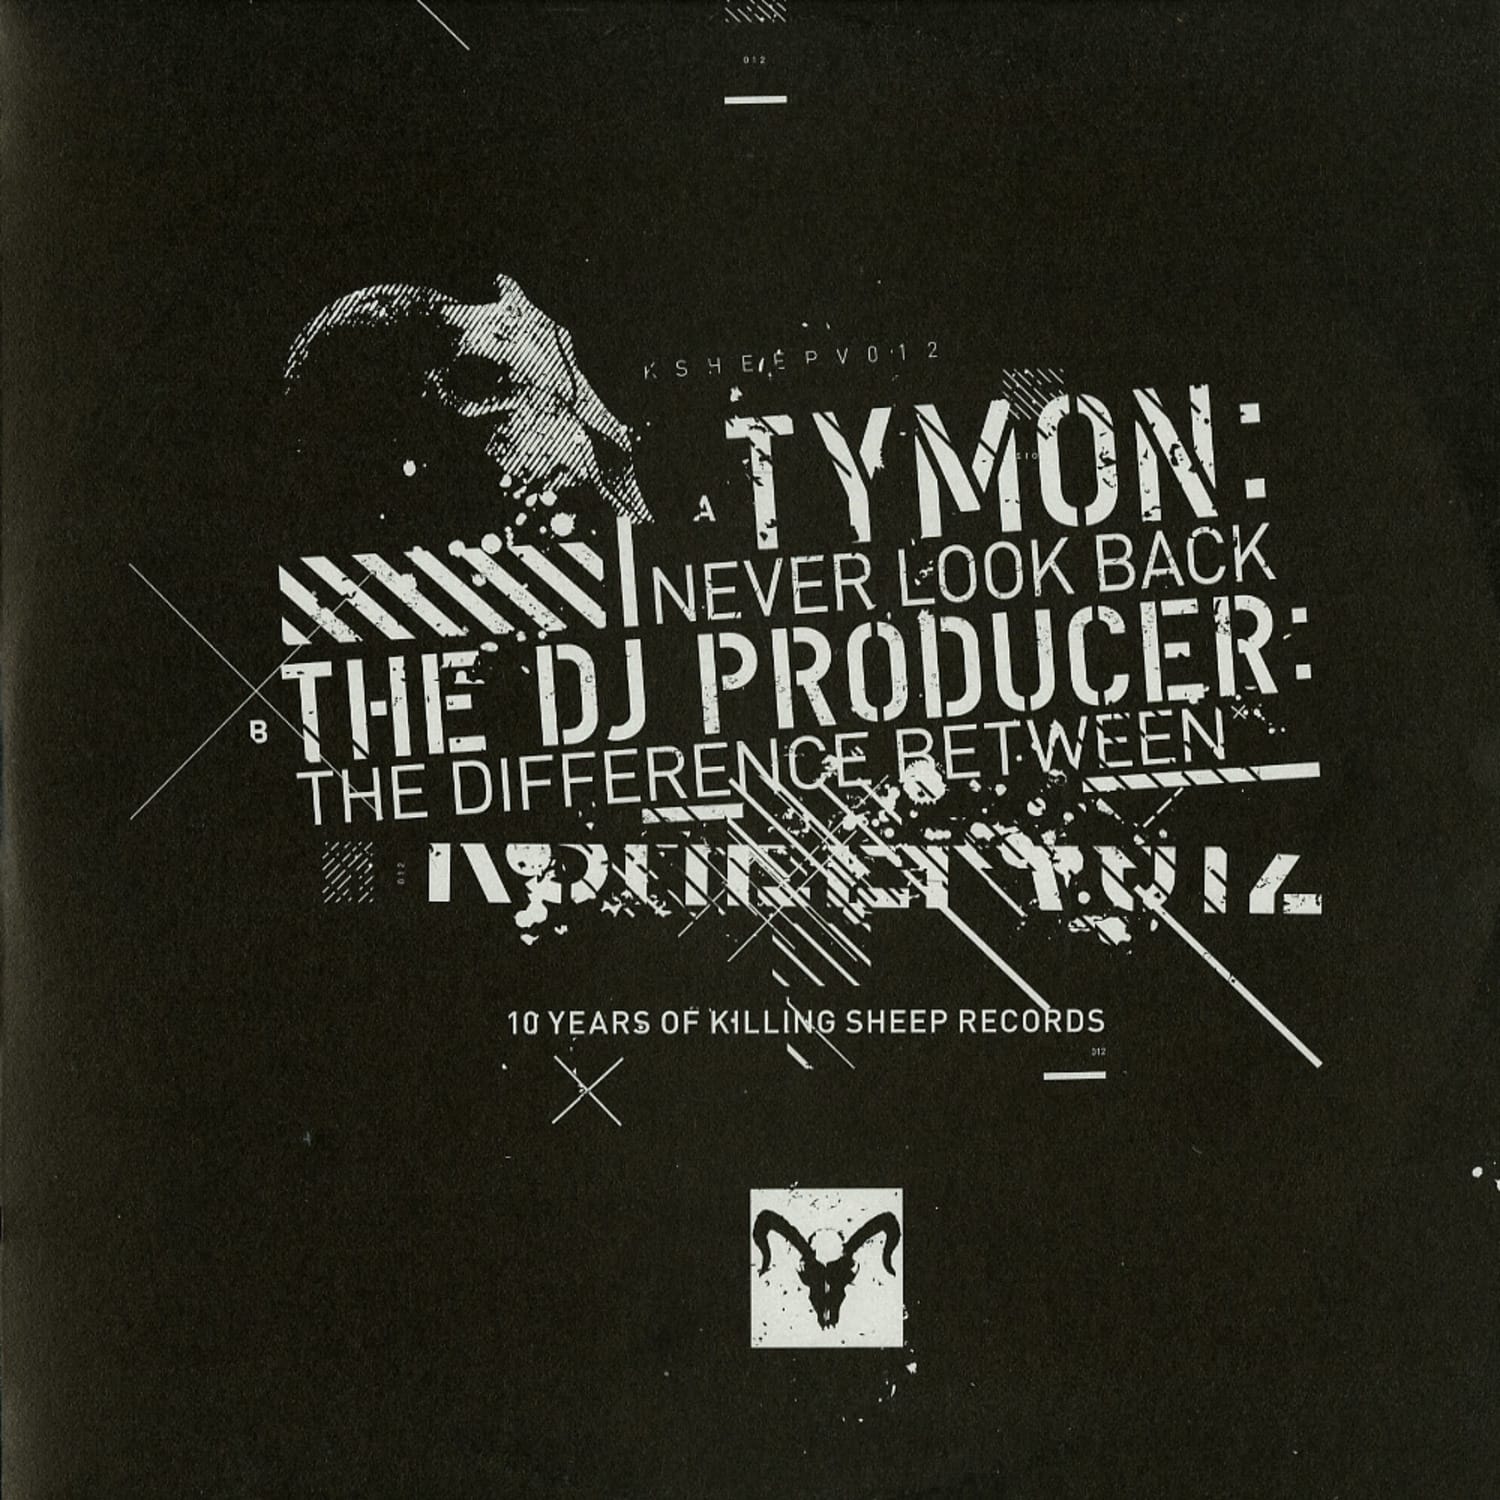 Tymon / The Dj Producer - NEVER LOOK BACK / THE DIFFERENCE BETWEEN